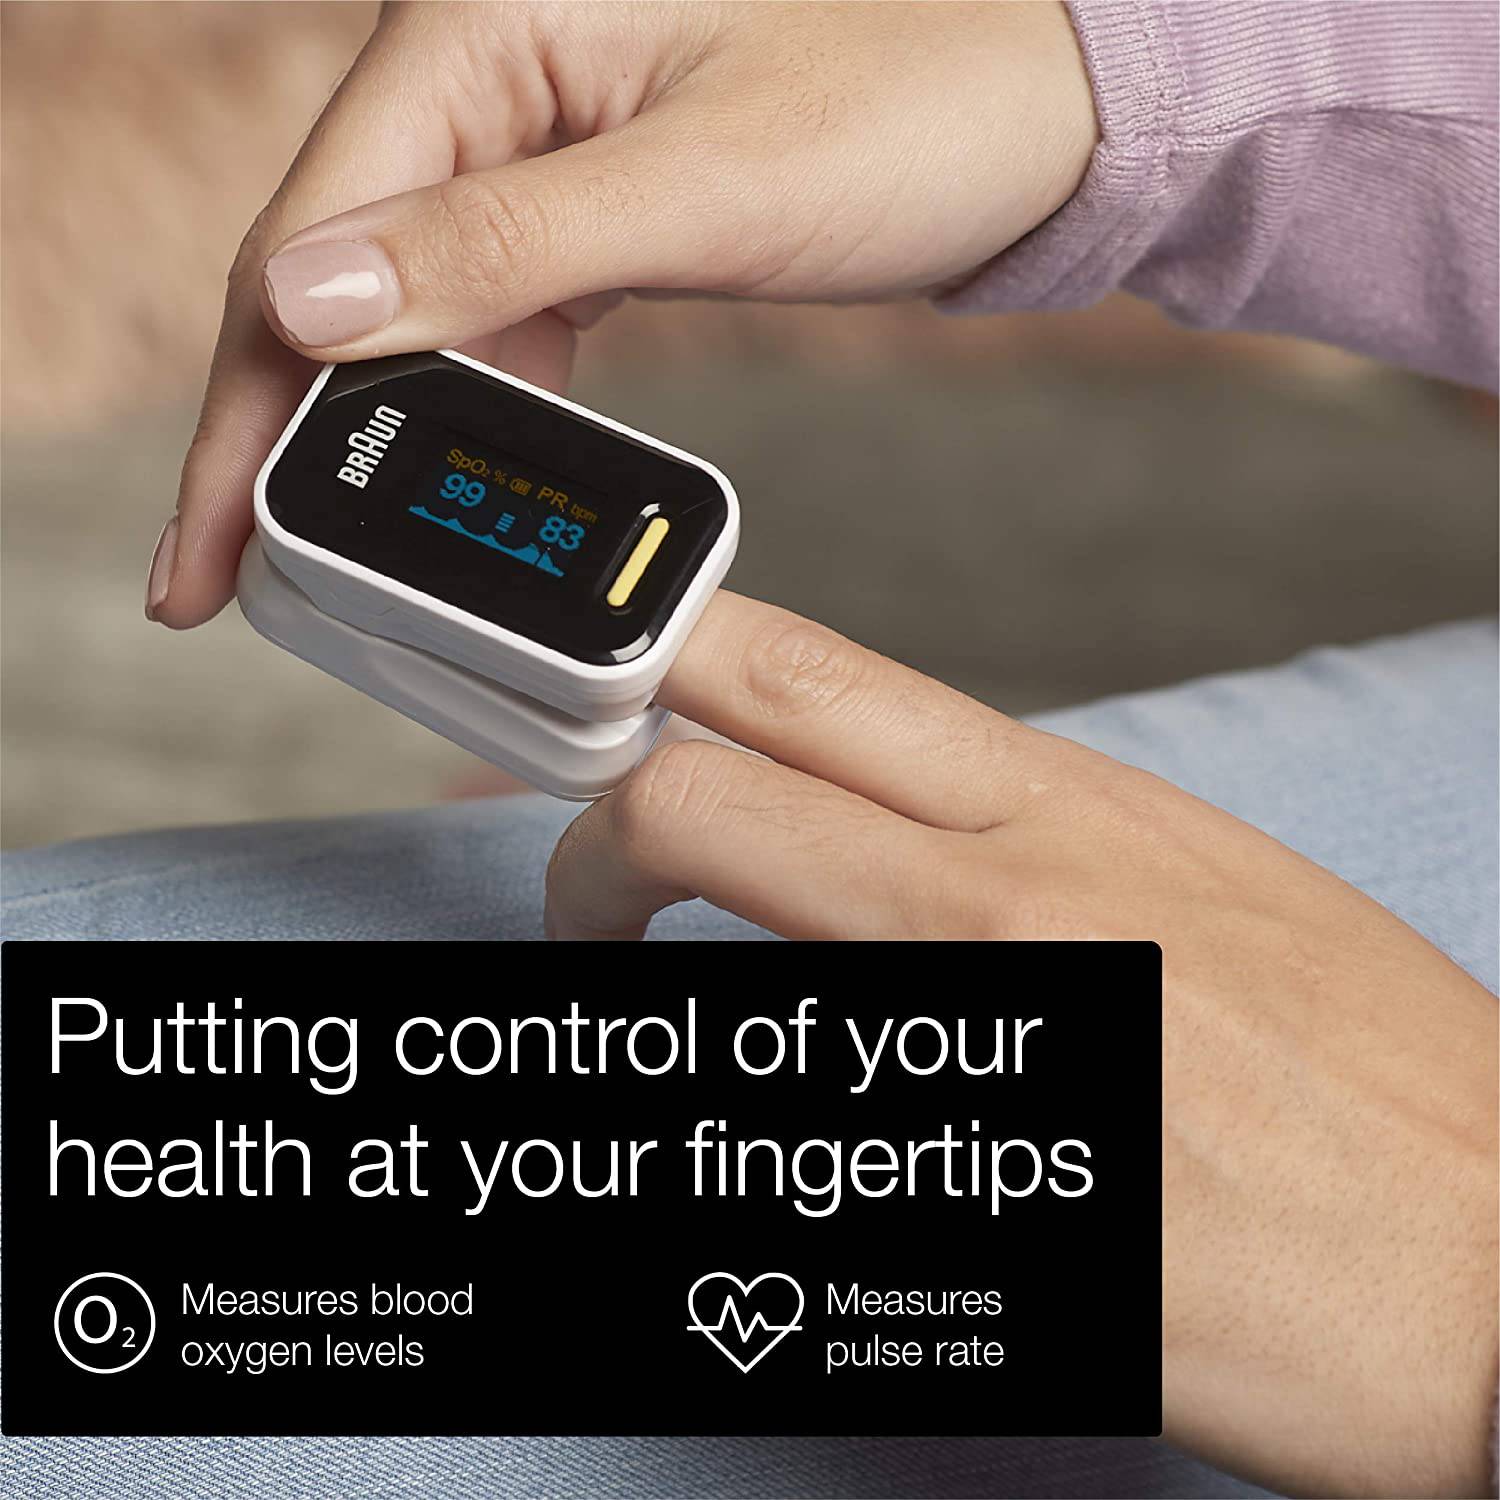 Braun Pulse Oximeter for Adults and Children 12+, with Clinically Validated Accuracy - Healthxpress.ie